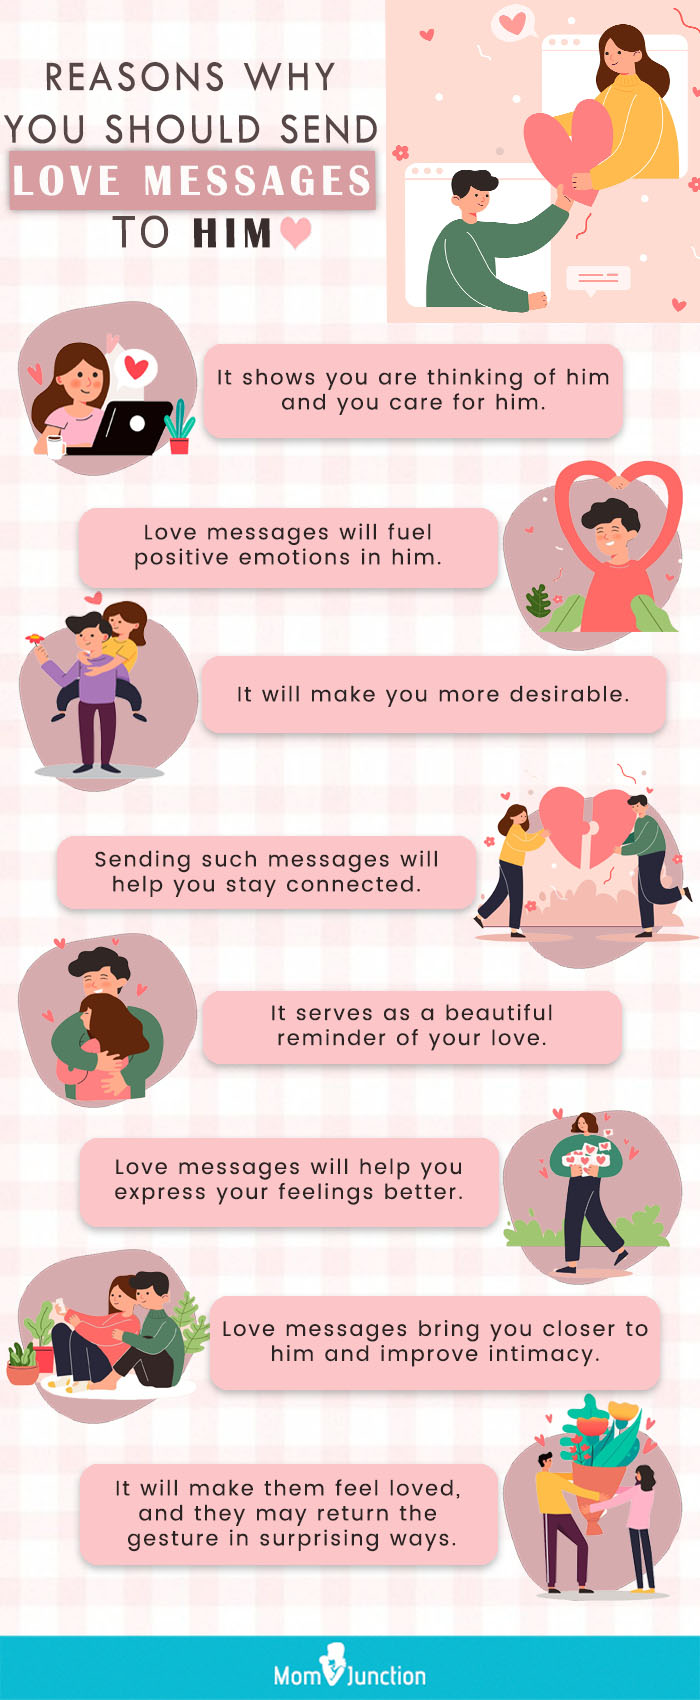 100+ Cute & Romantic Love Messages For Him To Make His Day